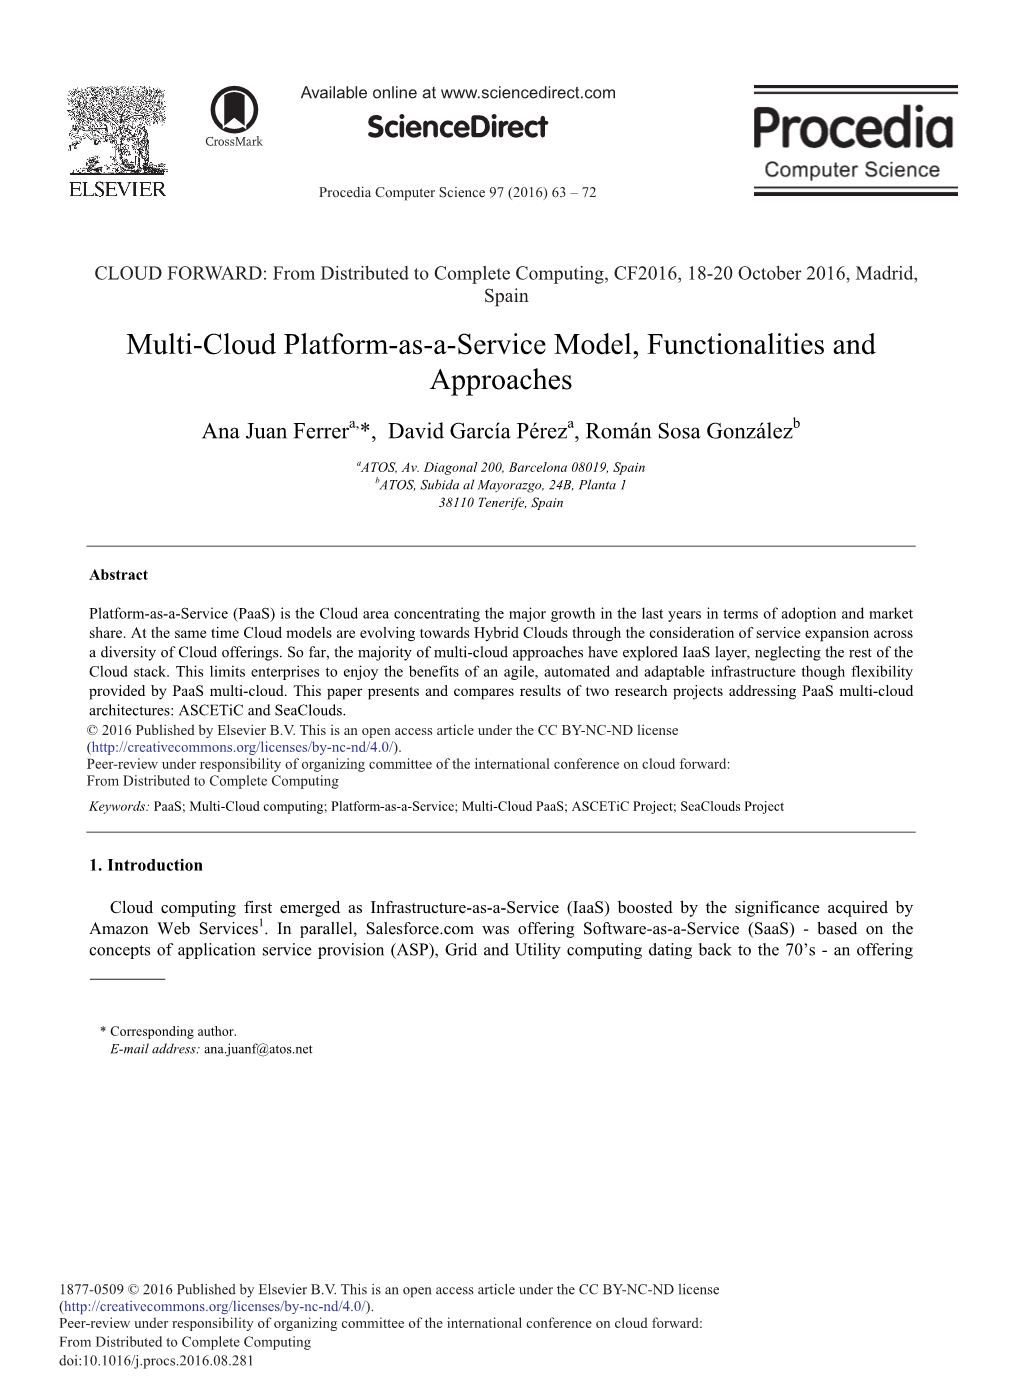 Multi-Cloud Platform-As-A-Service Model, Functionalities and Approaches